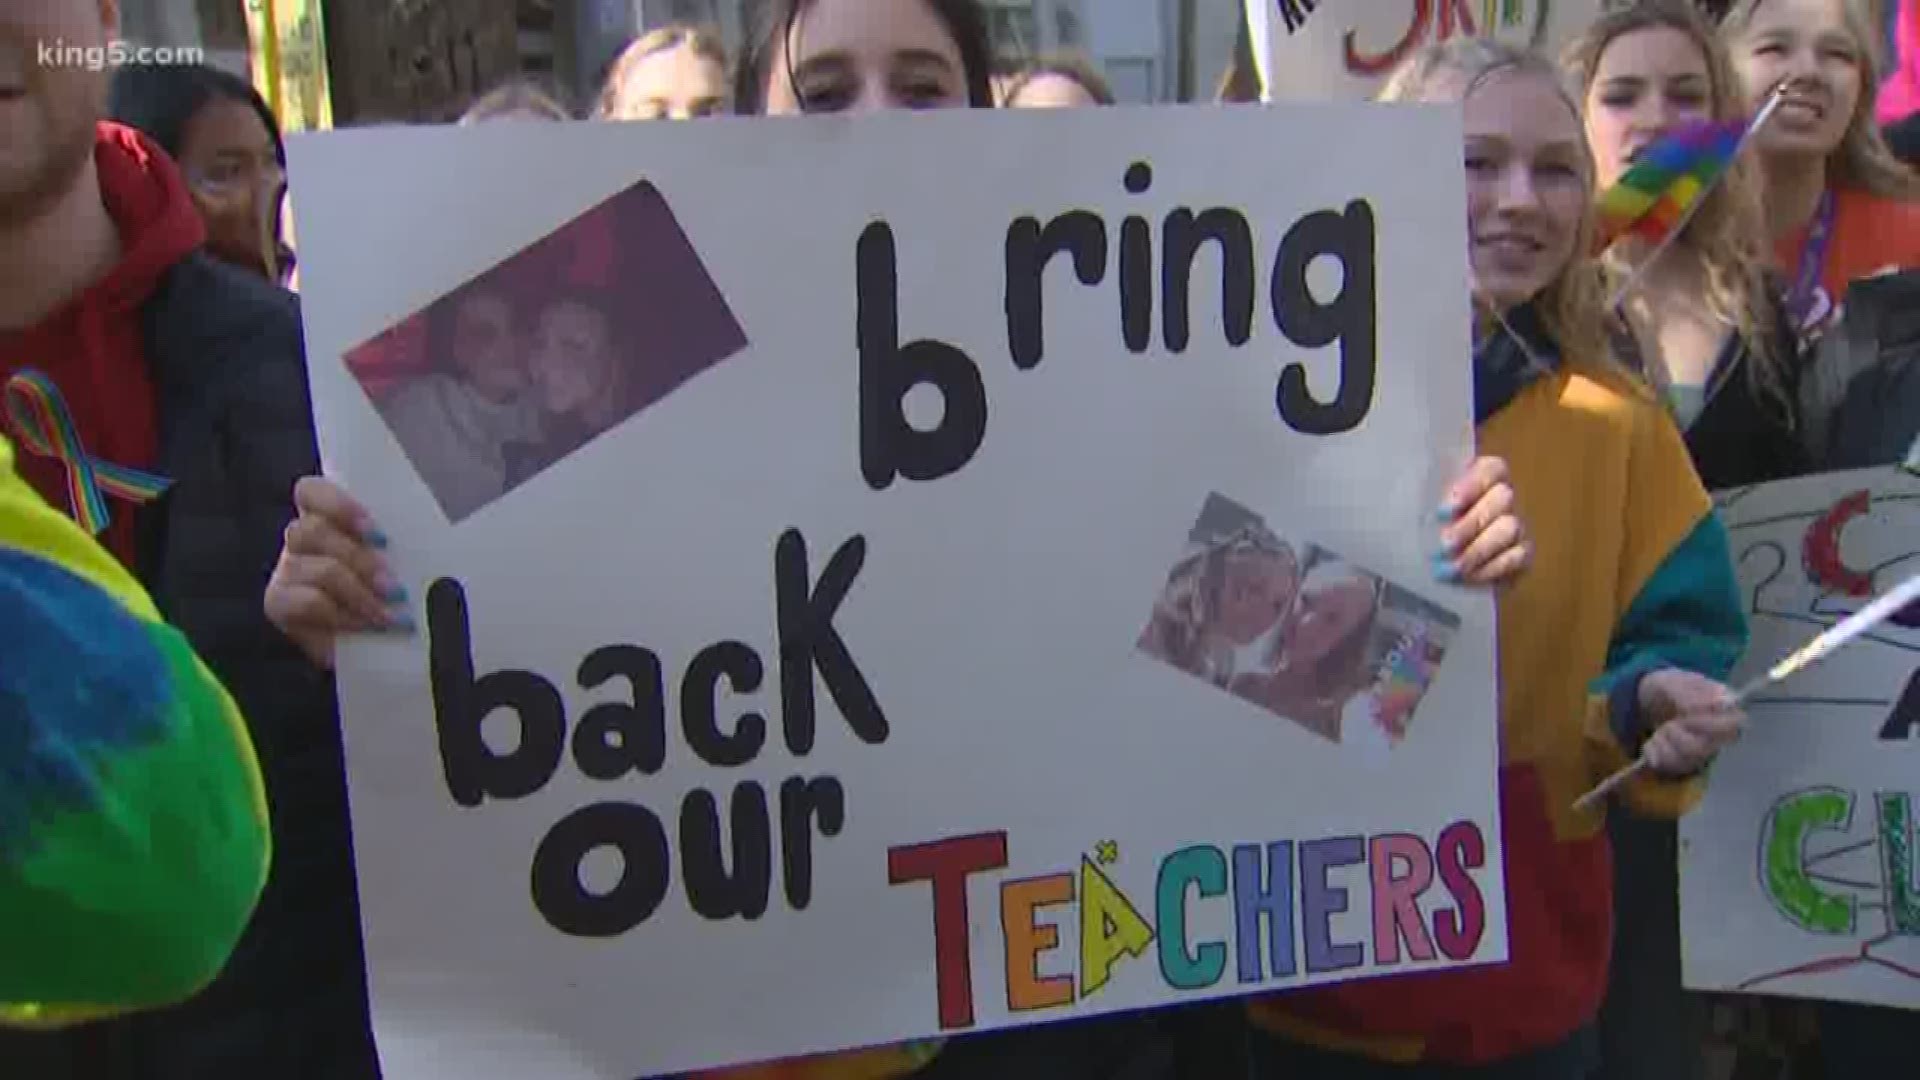 Students continued to protest on Friday in support of two of their teachers who are LGBTQ. Meanwhile, the teacher's attorney told their side of the story.